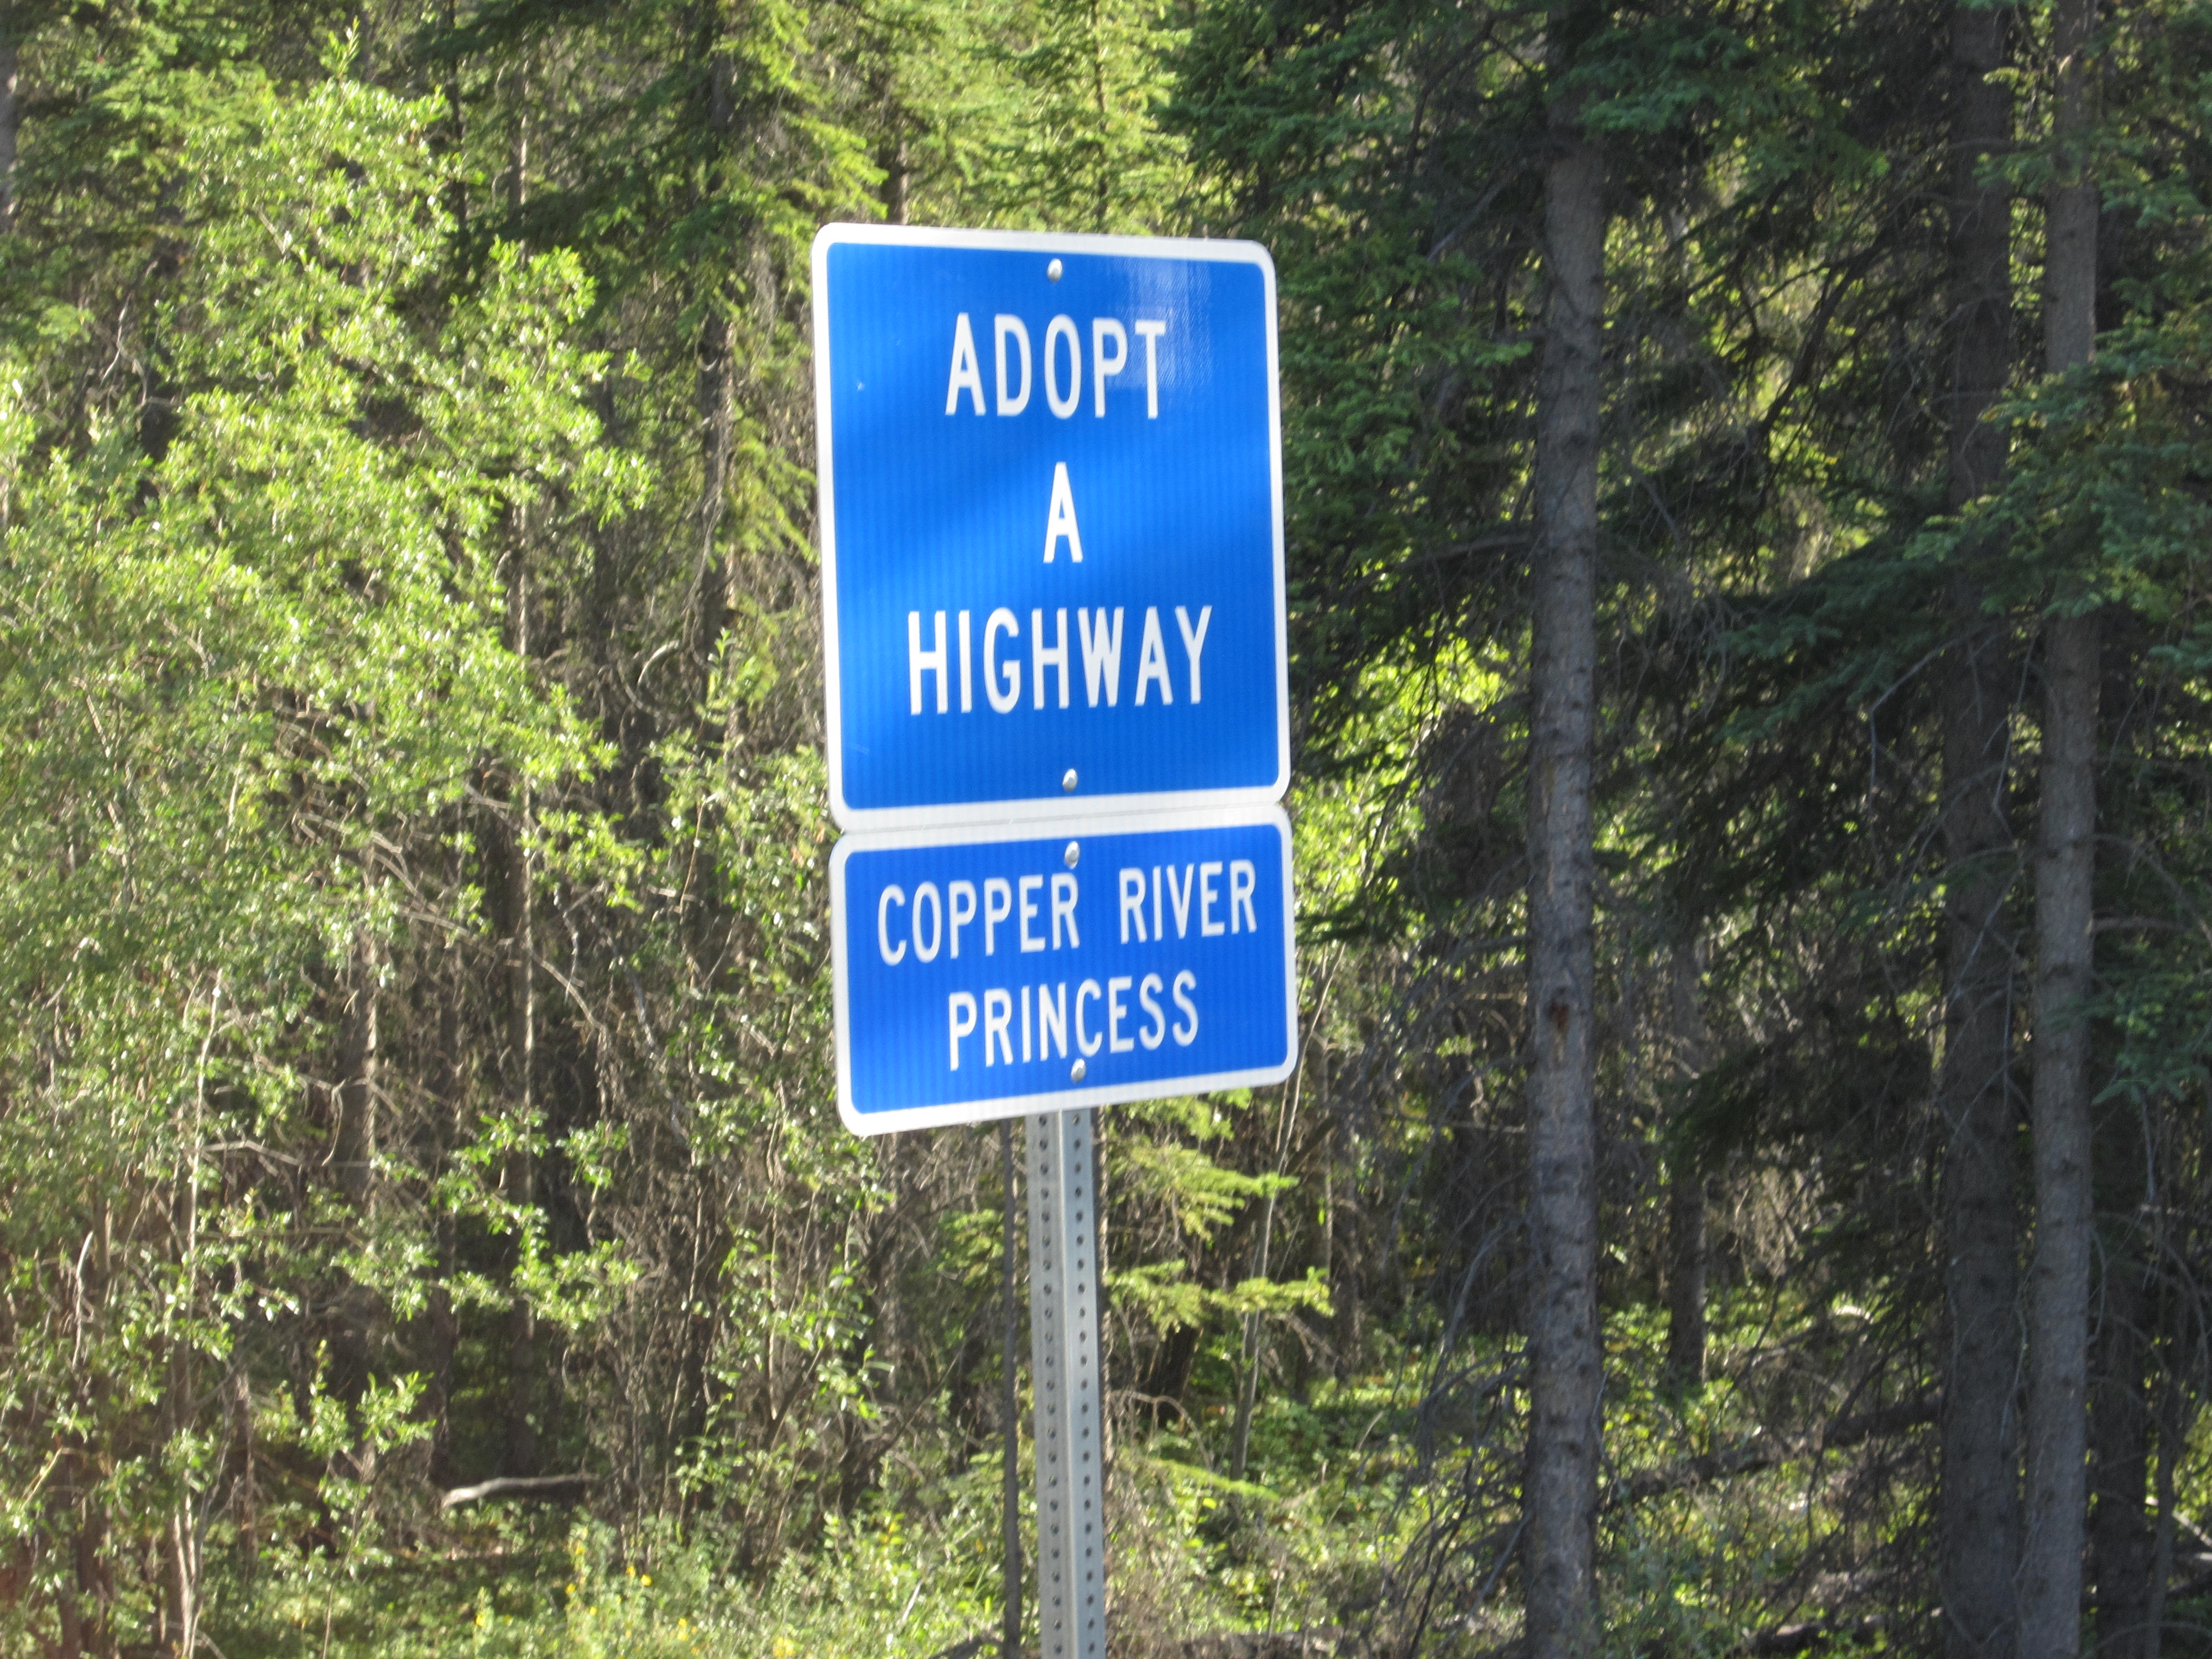 A blue Adopt A Highway sign sponsored by Copper River Princess